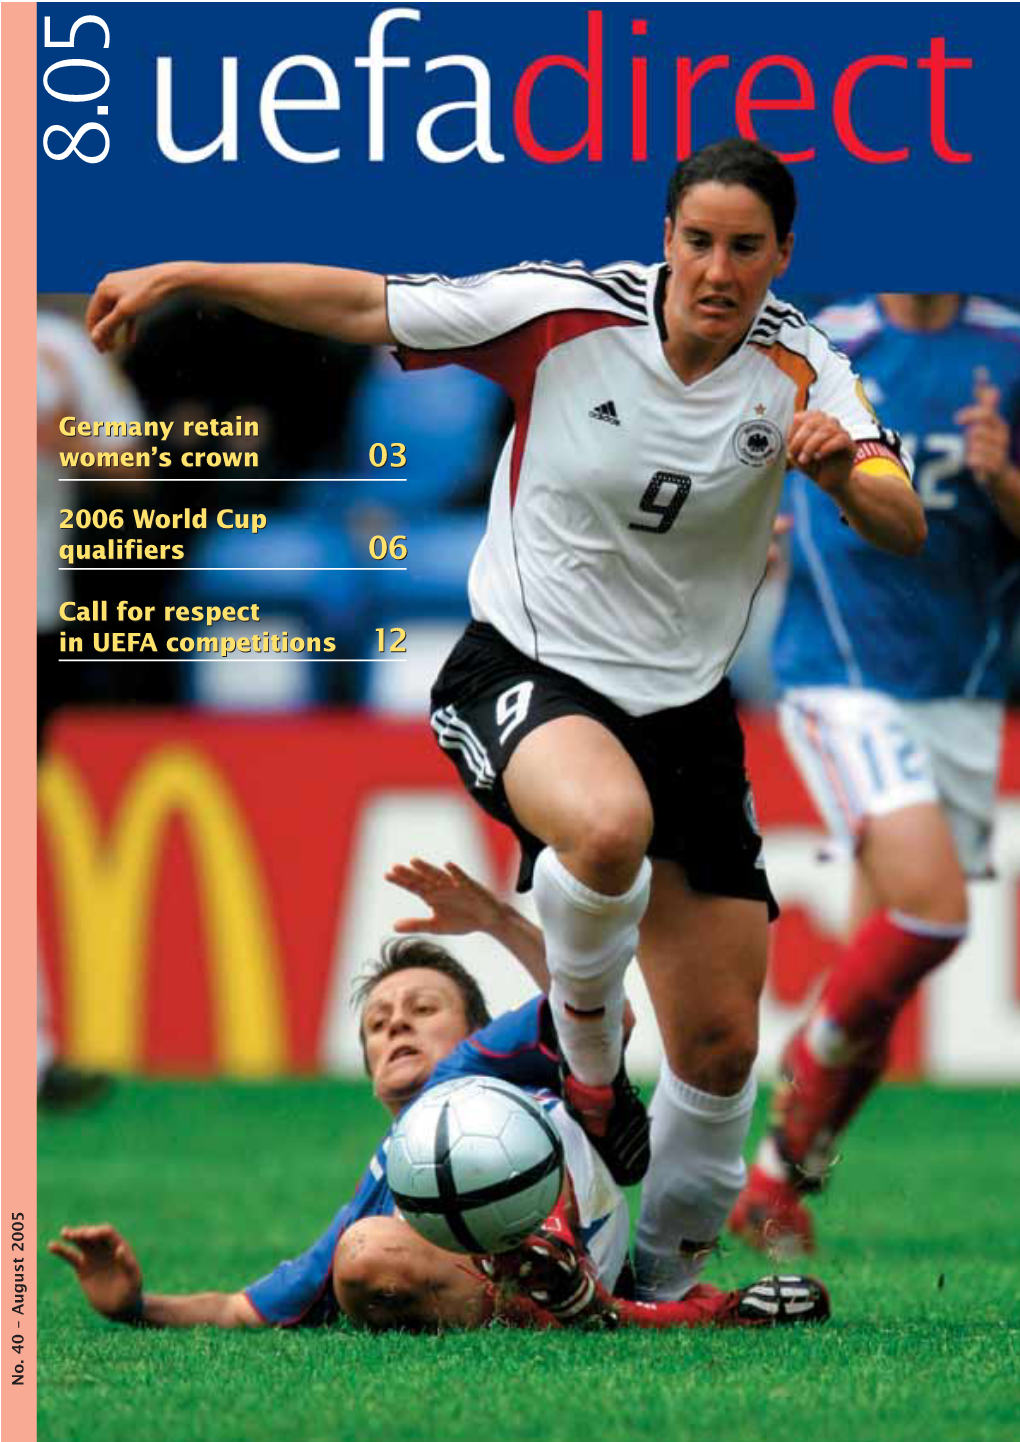 Germany Retain Women's Crown 2006 World Cup Qualifiers Call for Respect in UEFA Competitions 12 Germany Retain Women's Crown